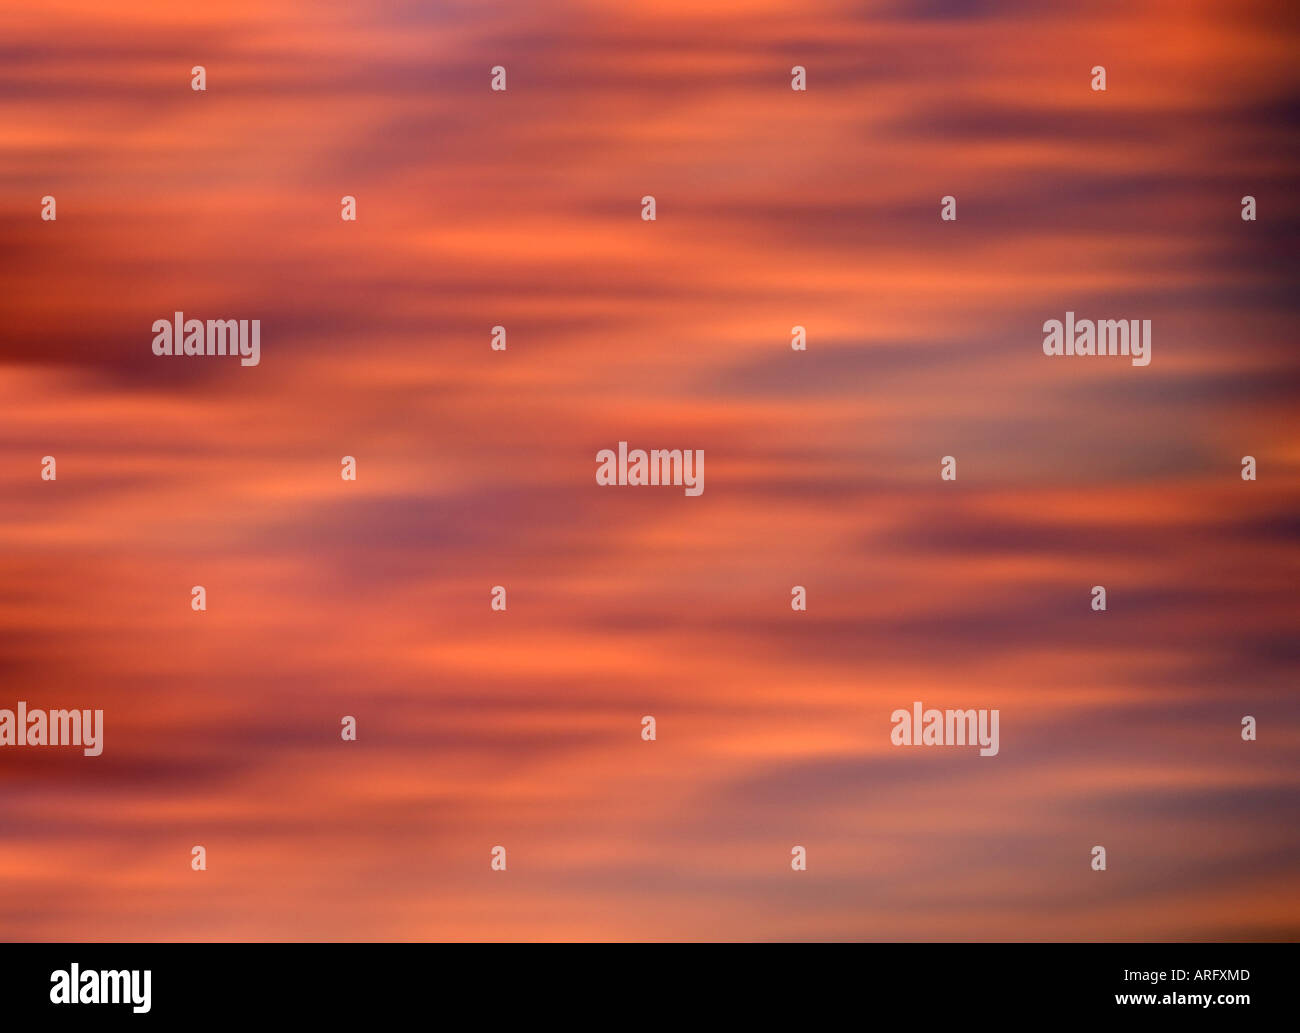 BACKGROUND WITH ABSTRACT TWILIGHT PATTERN Stock Photo